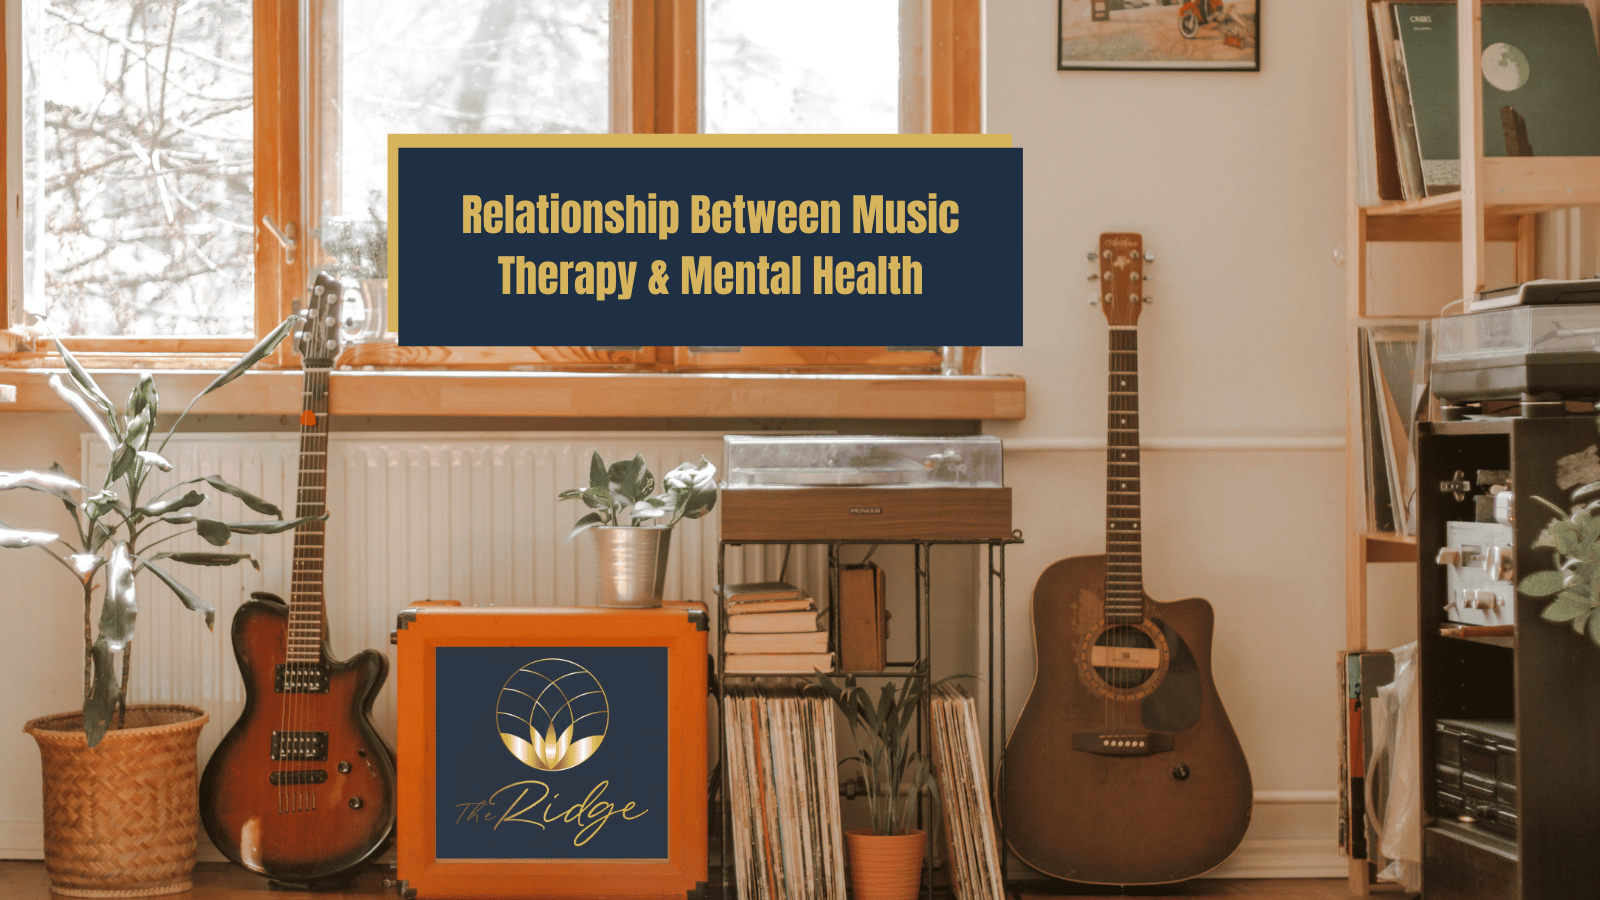 Relationship Between Music Therapy & Mental Health